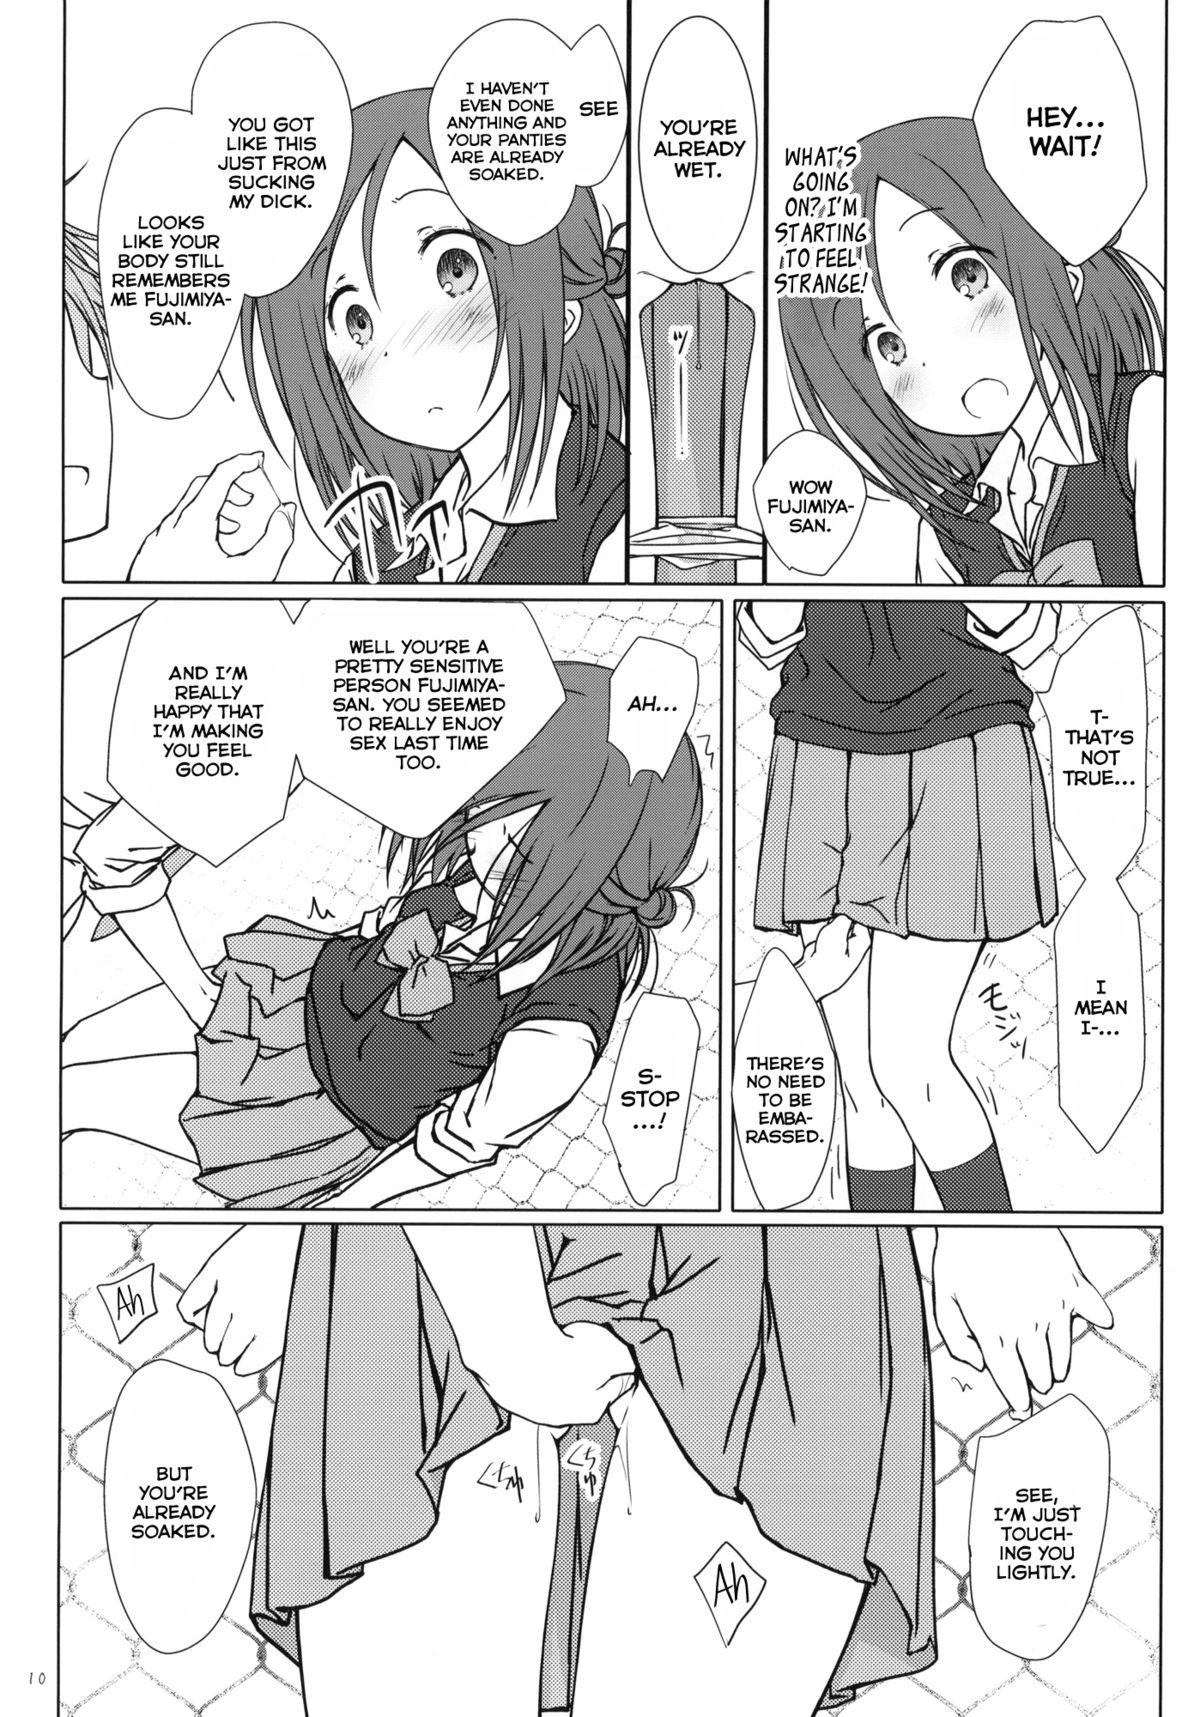 Sloppy Blowjob "Tomodachi to no Sex." - One week friends French - Page 9